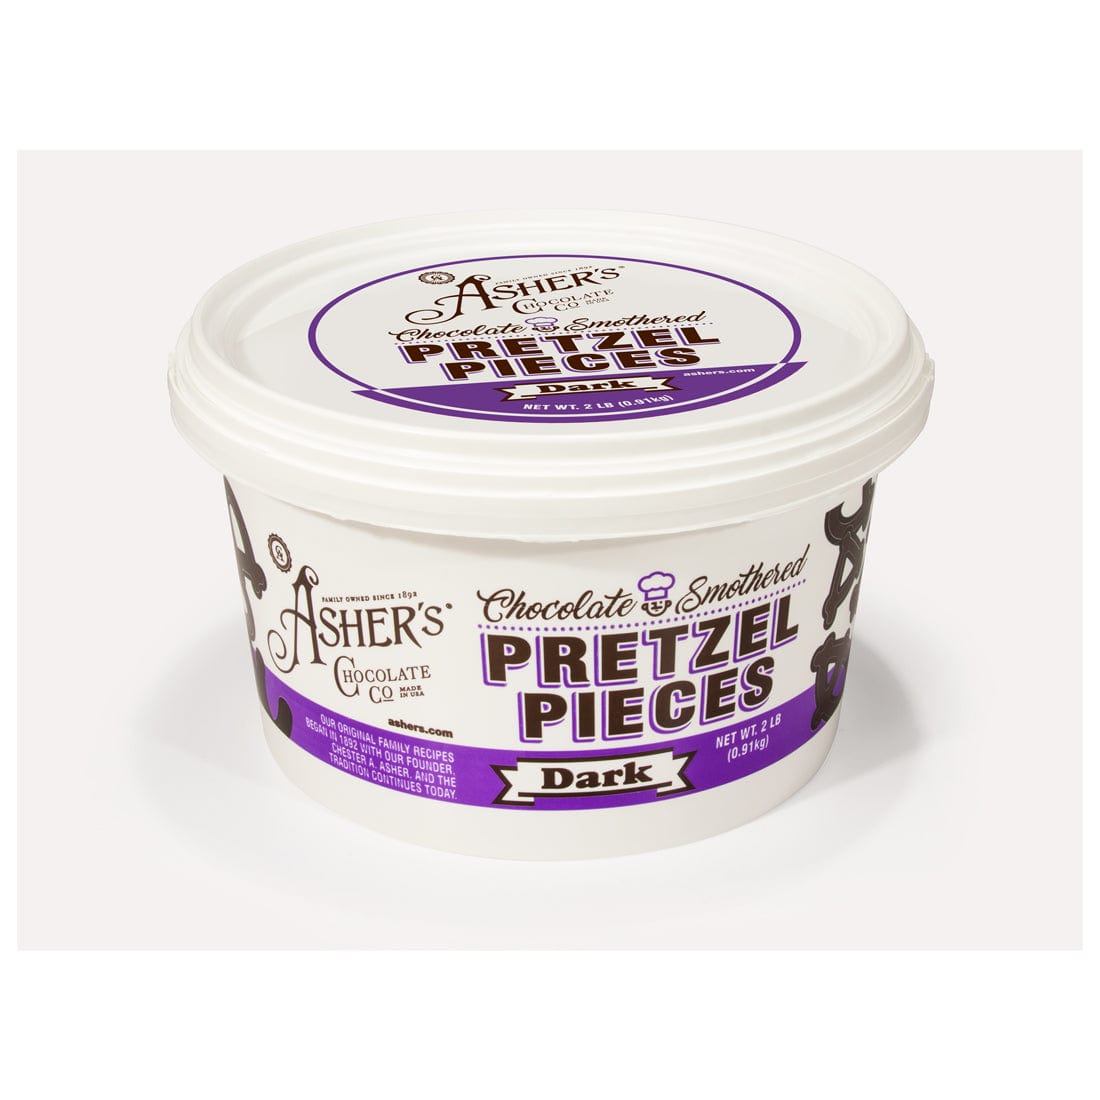 Asher's Chocolate Asher's Dark Chocolate Smothered Pretzel Pieces – 2 lb. Pail